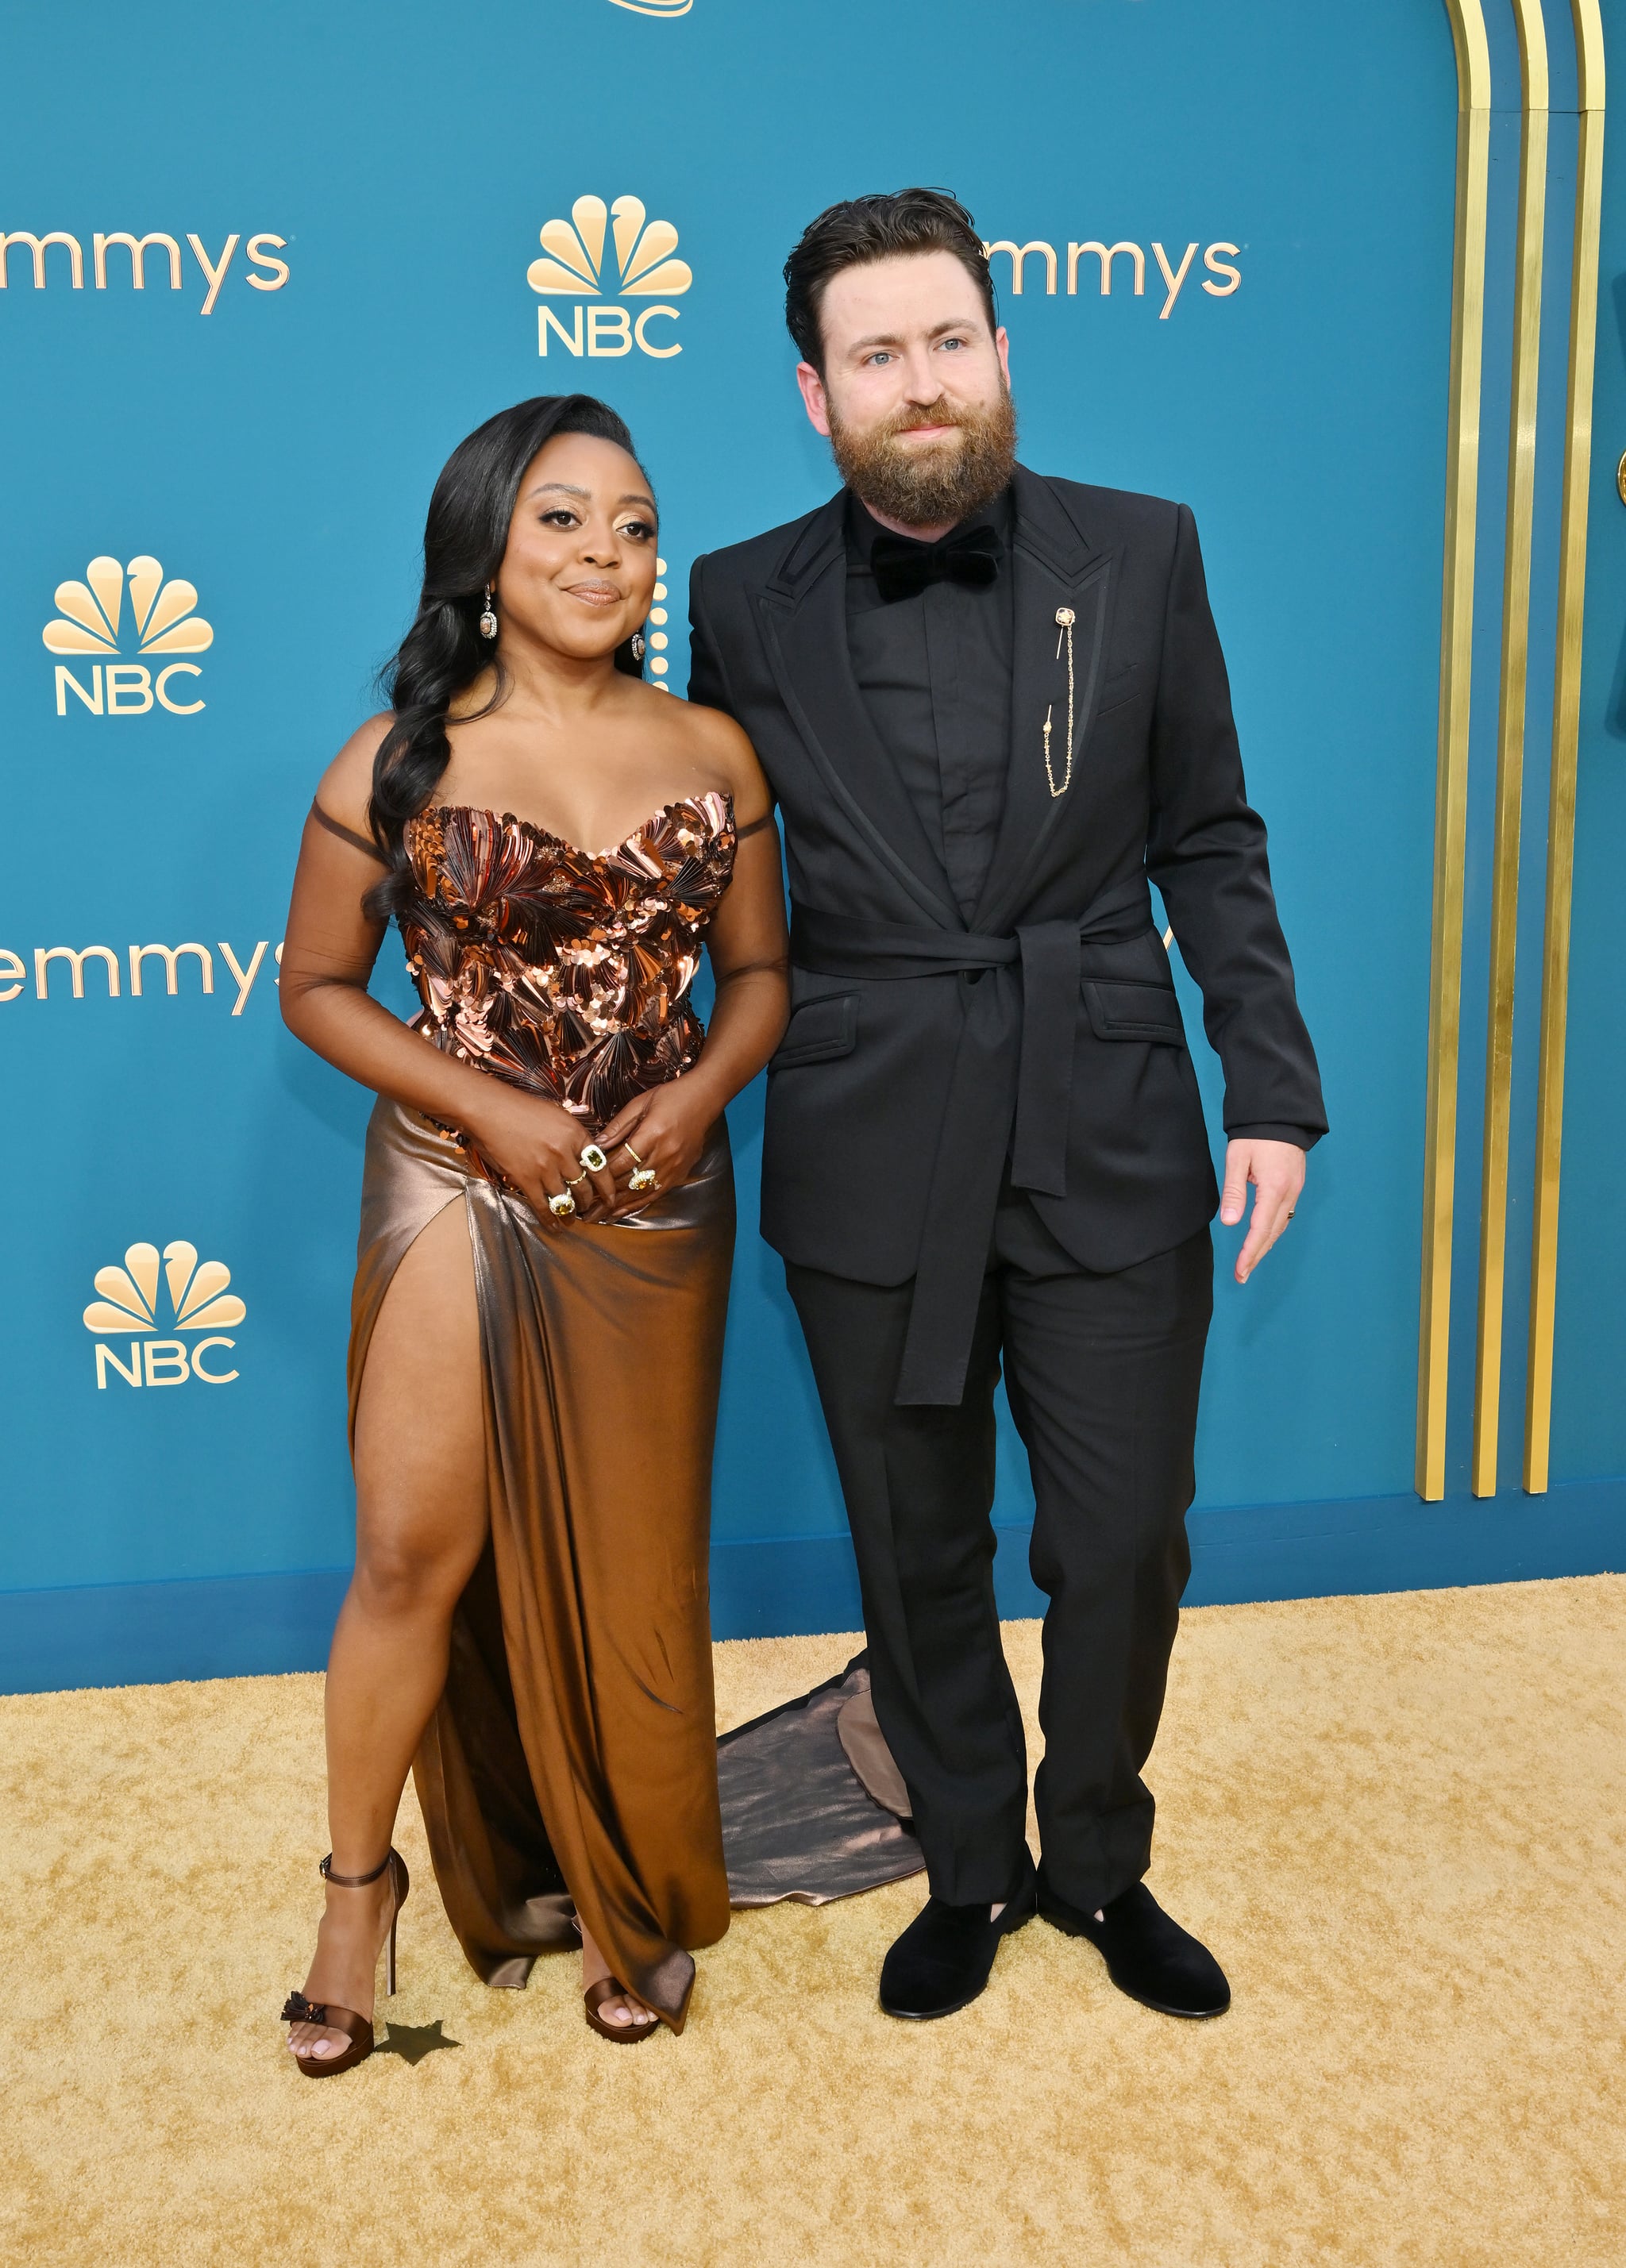 Quinta Brunson and Kevin Jay Anik at the 74th Primetime Emmy Awards held at Microsoft Theater on September 12, 2022 in Los Angeles, California. (Photo by Michael Buckner/Variety via Getty Images)